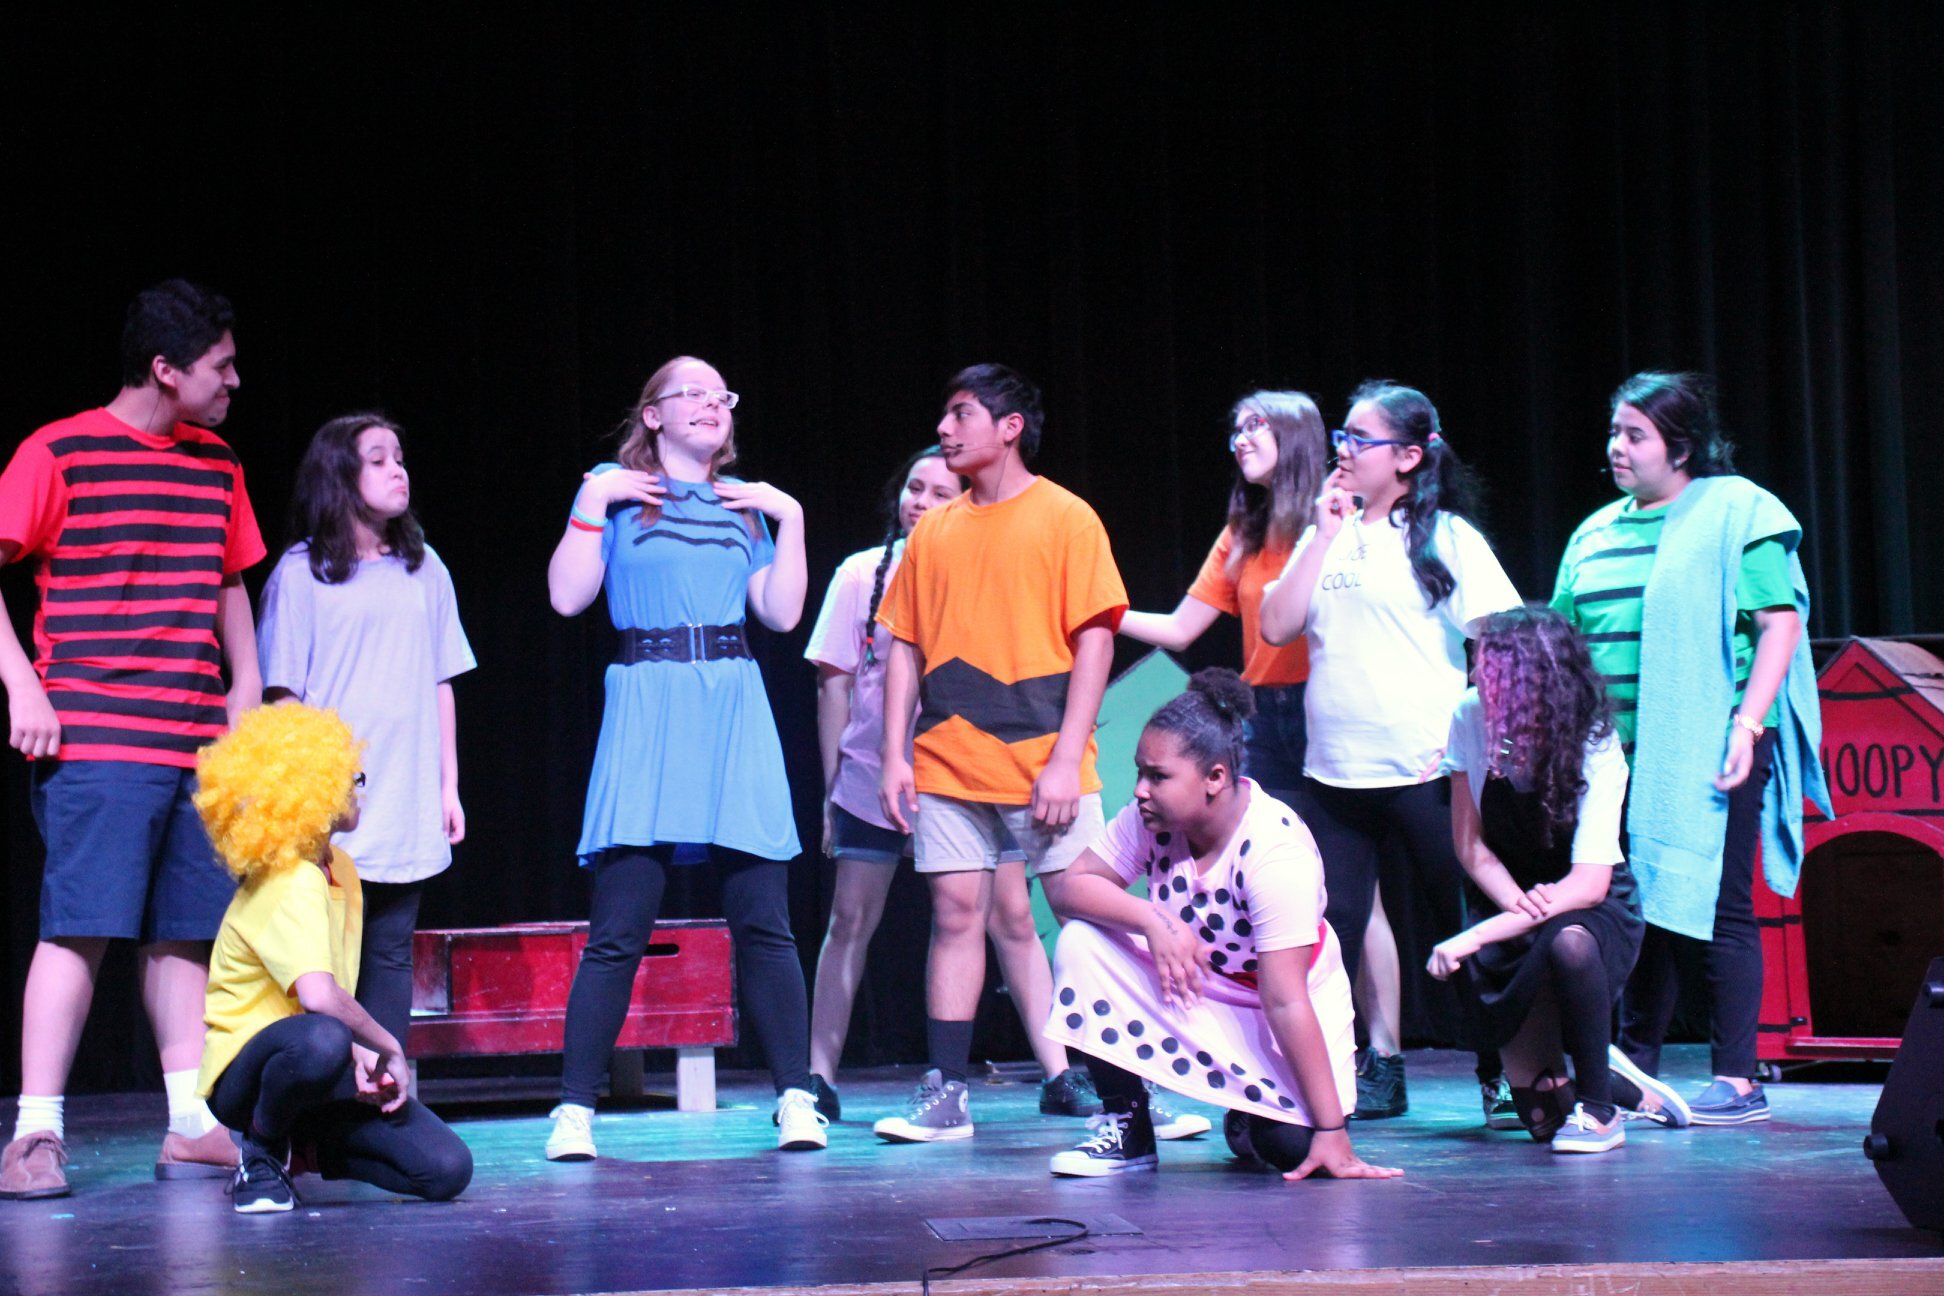 Lee Students performing "You're A Good Man, Charlie Brown."